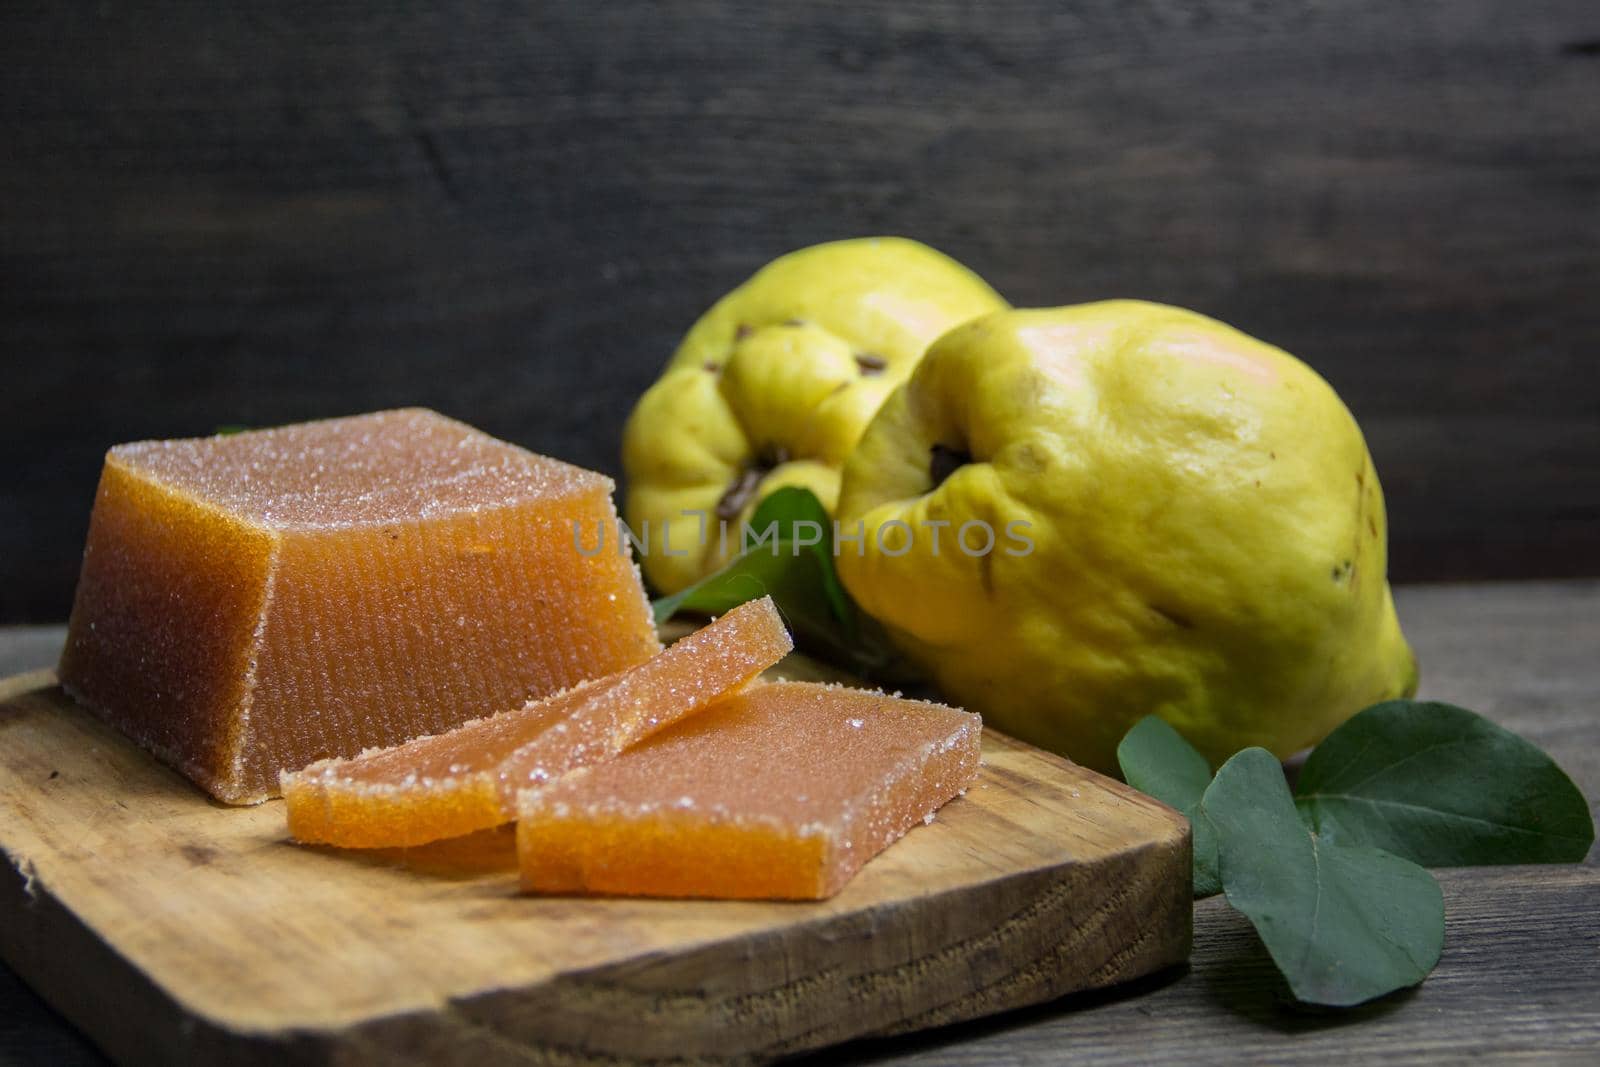 quince jelly and quinces on rustic wooden background by GabrielaBertolini